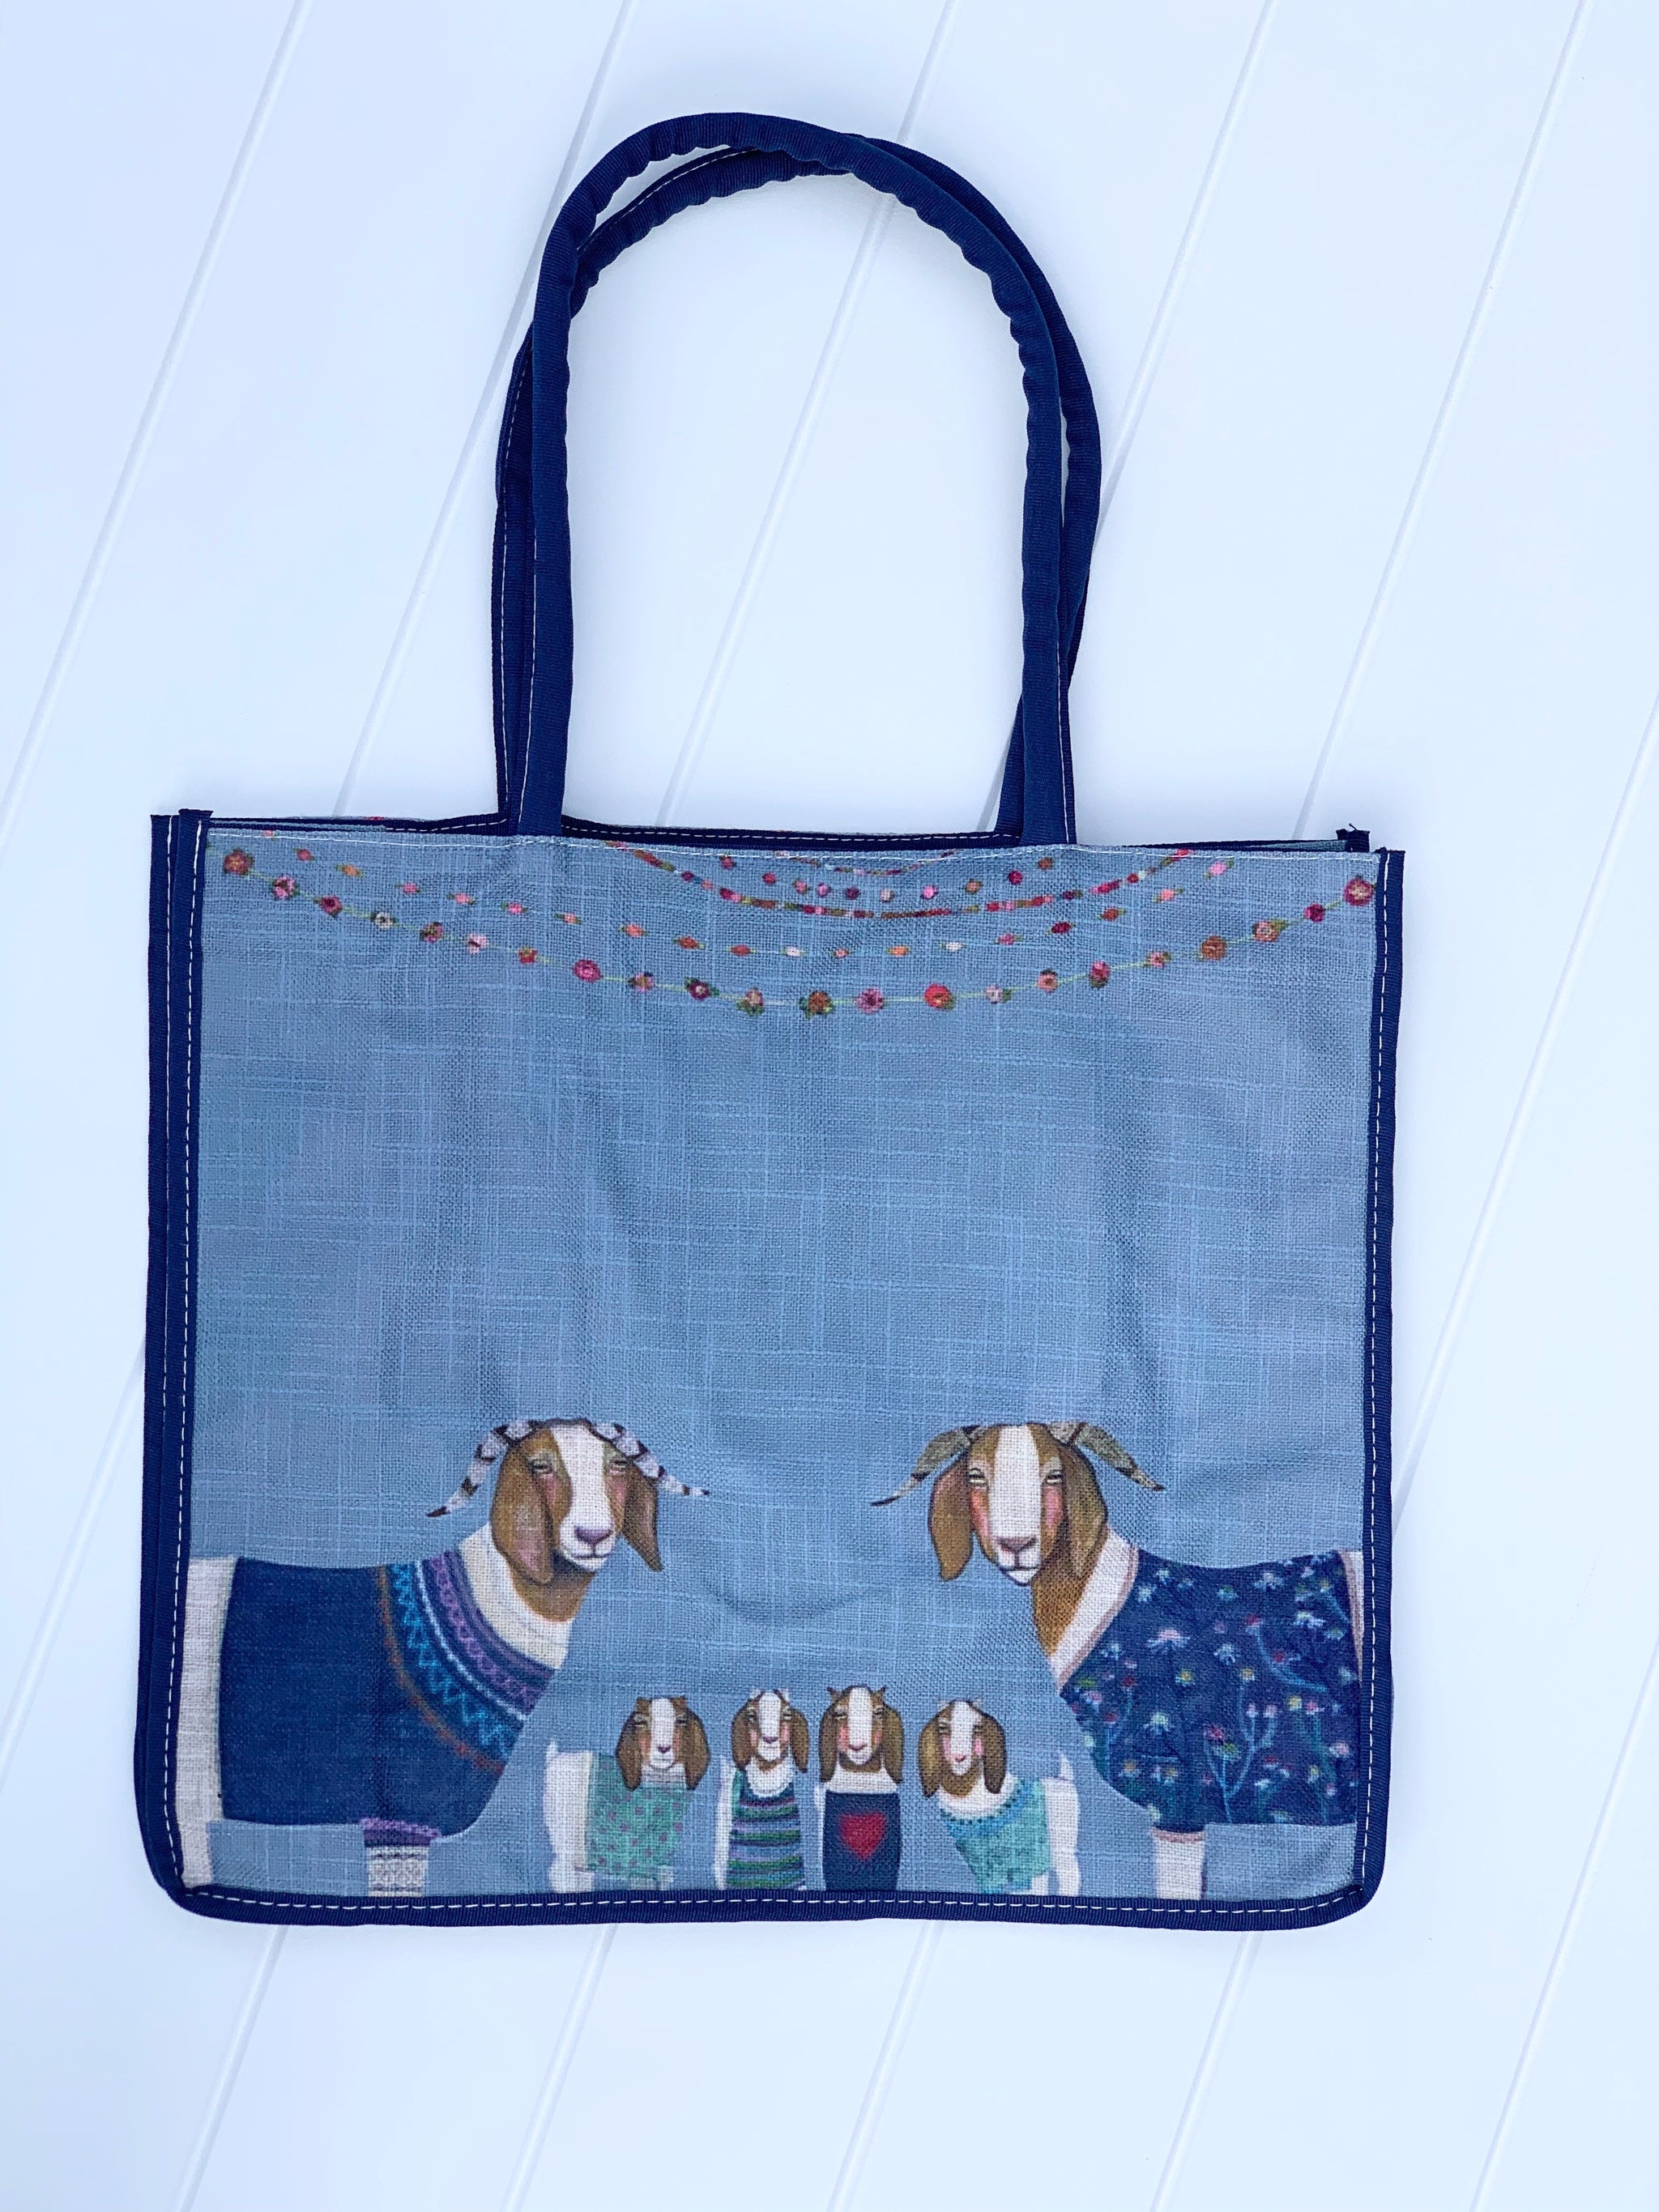 'Goat Family' Tote